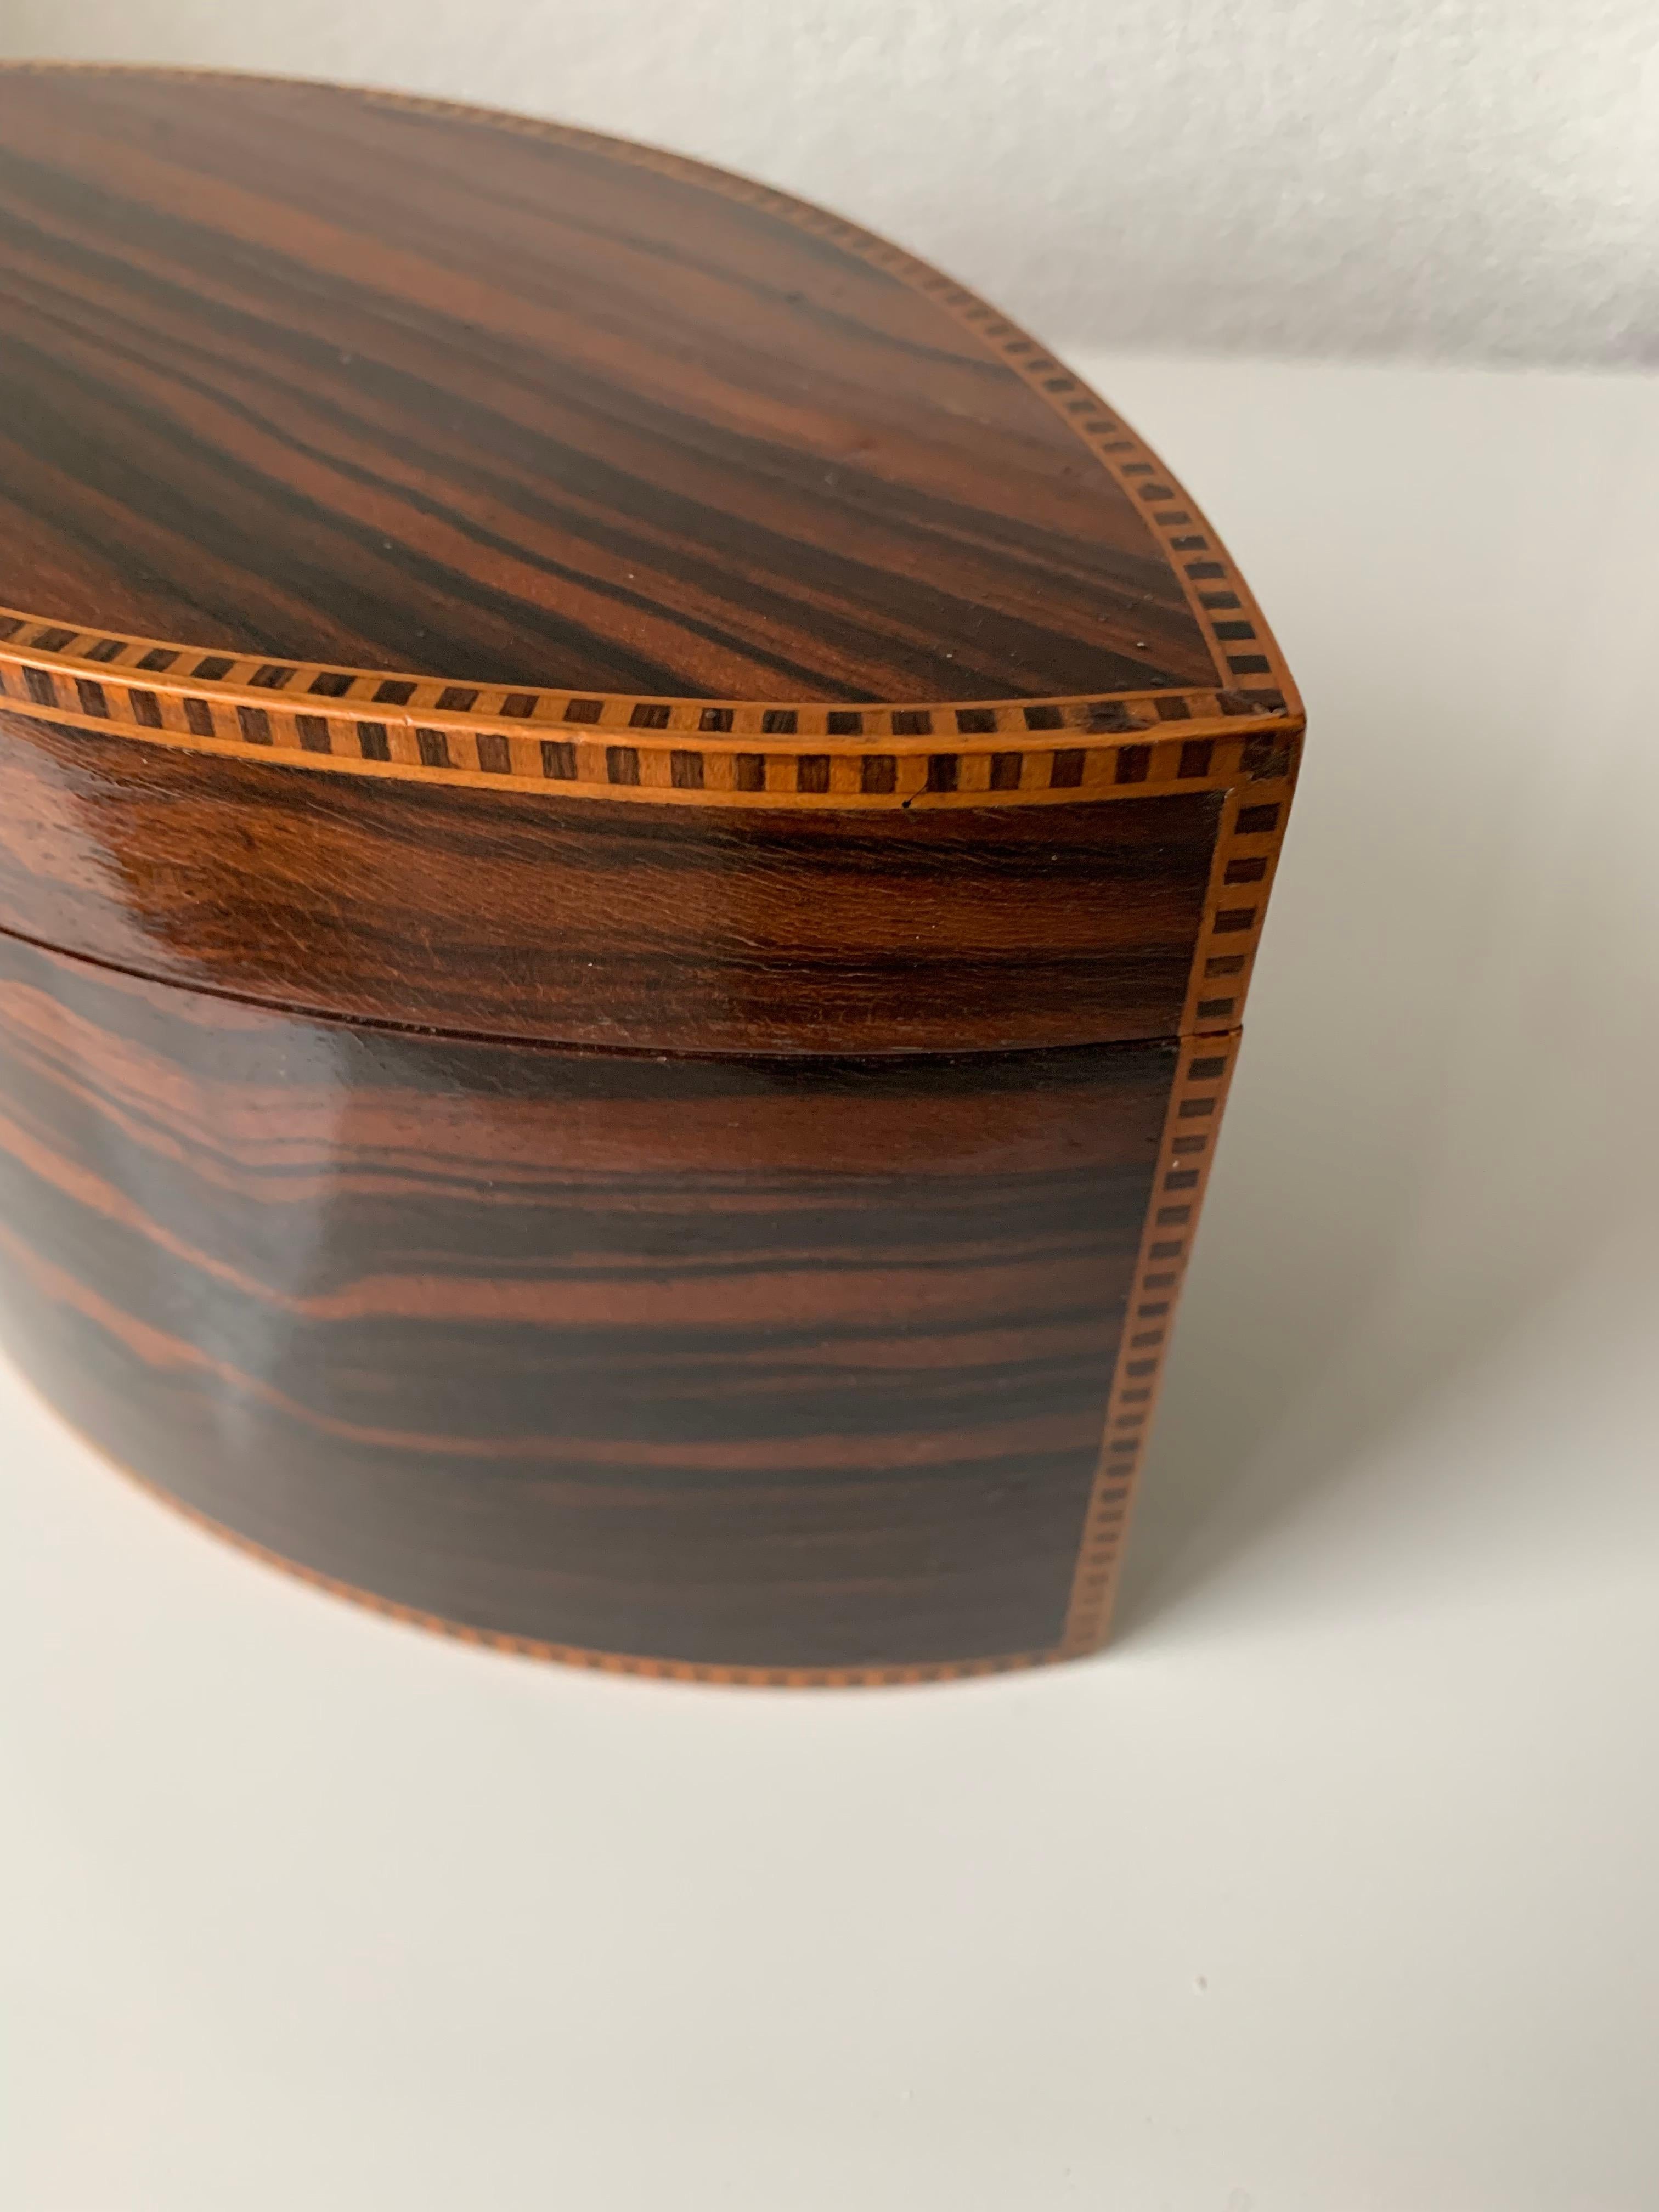 Top Quality and Stunning Shape Art Deco Nutwood, Hardwood and Satinwood Box,  4